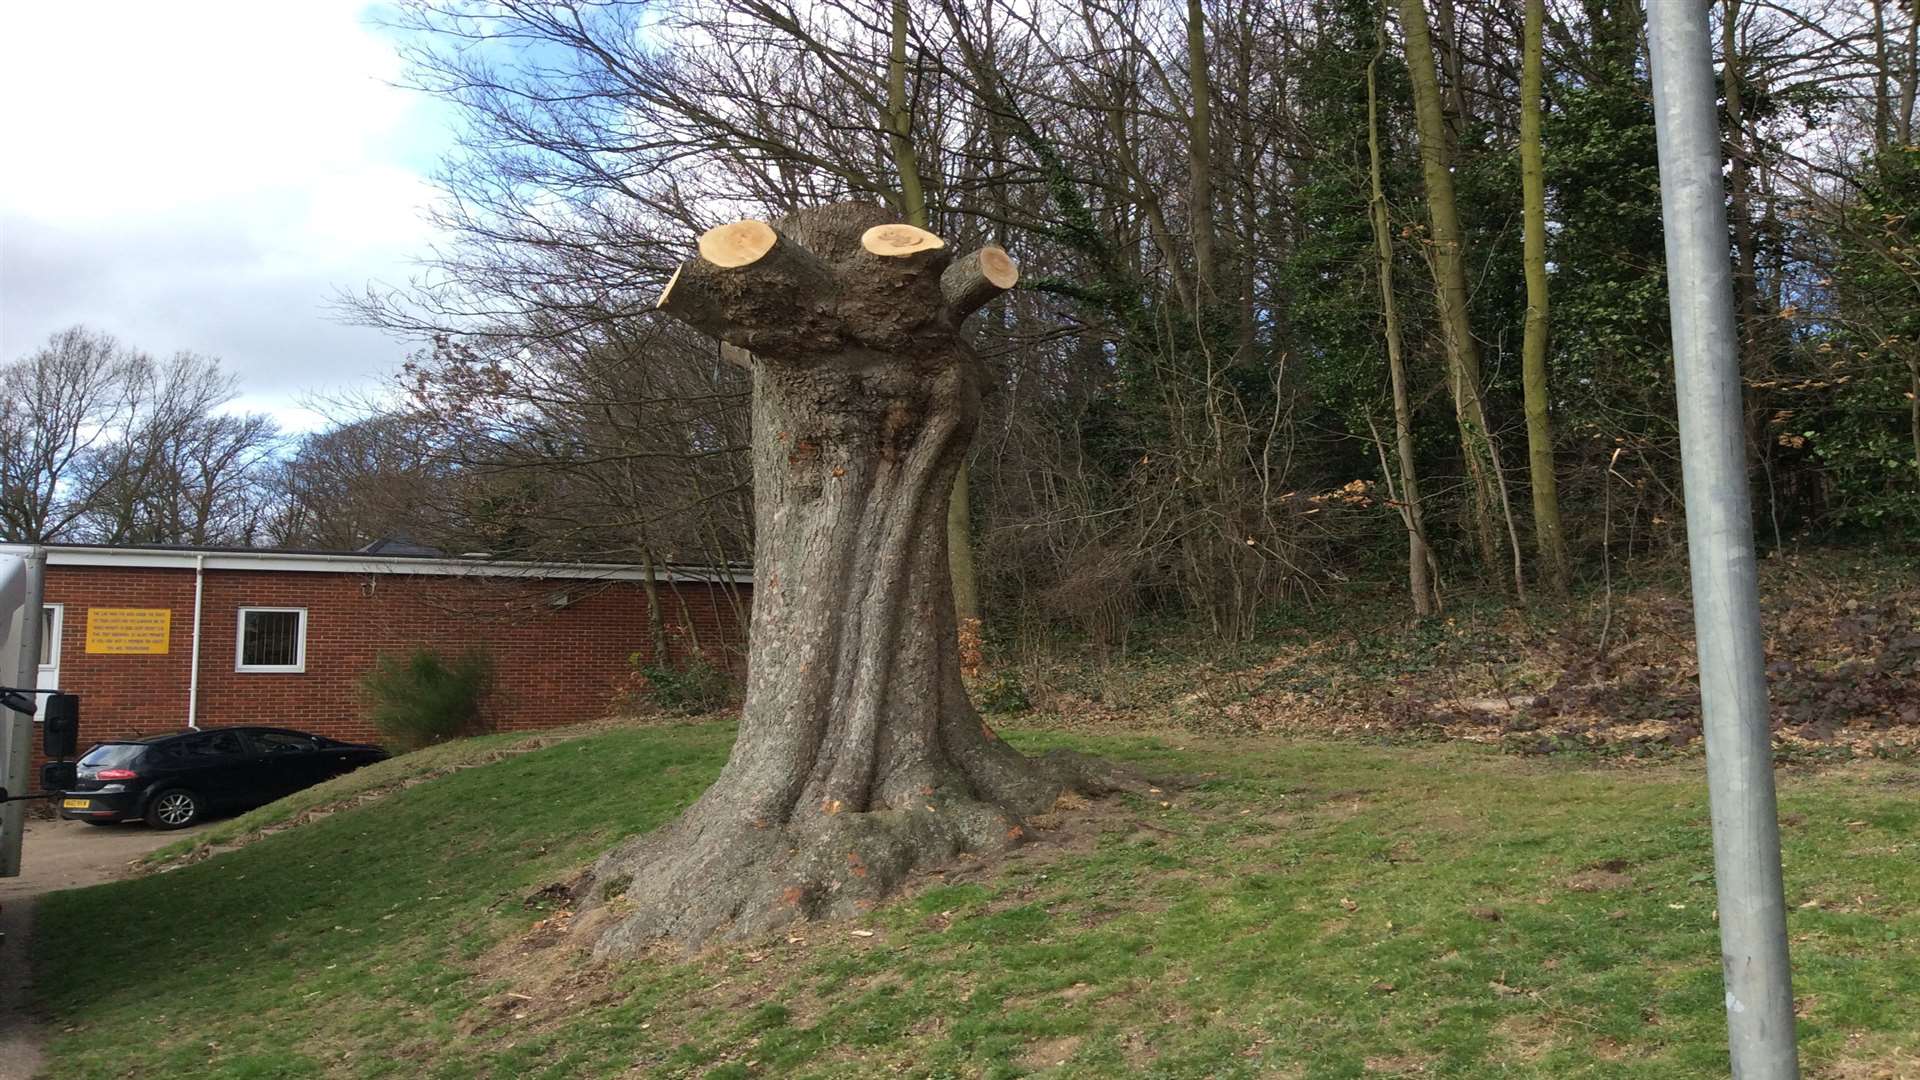 The felled tree in Grove Park